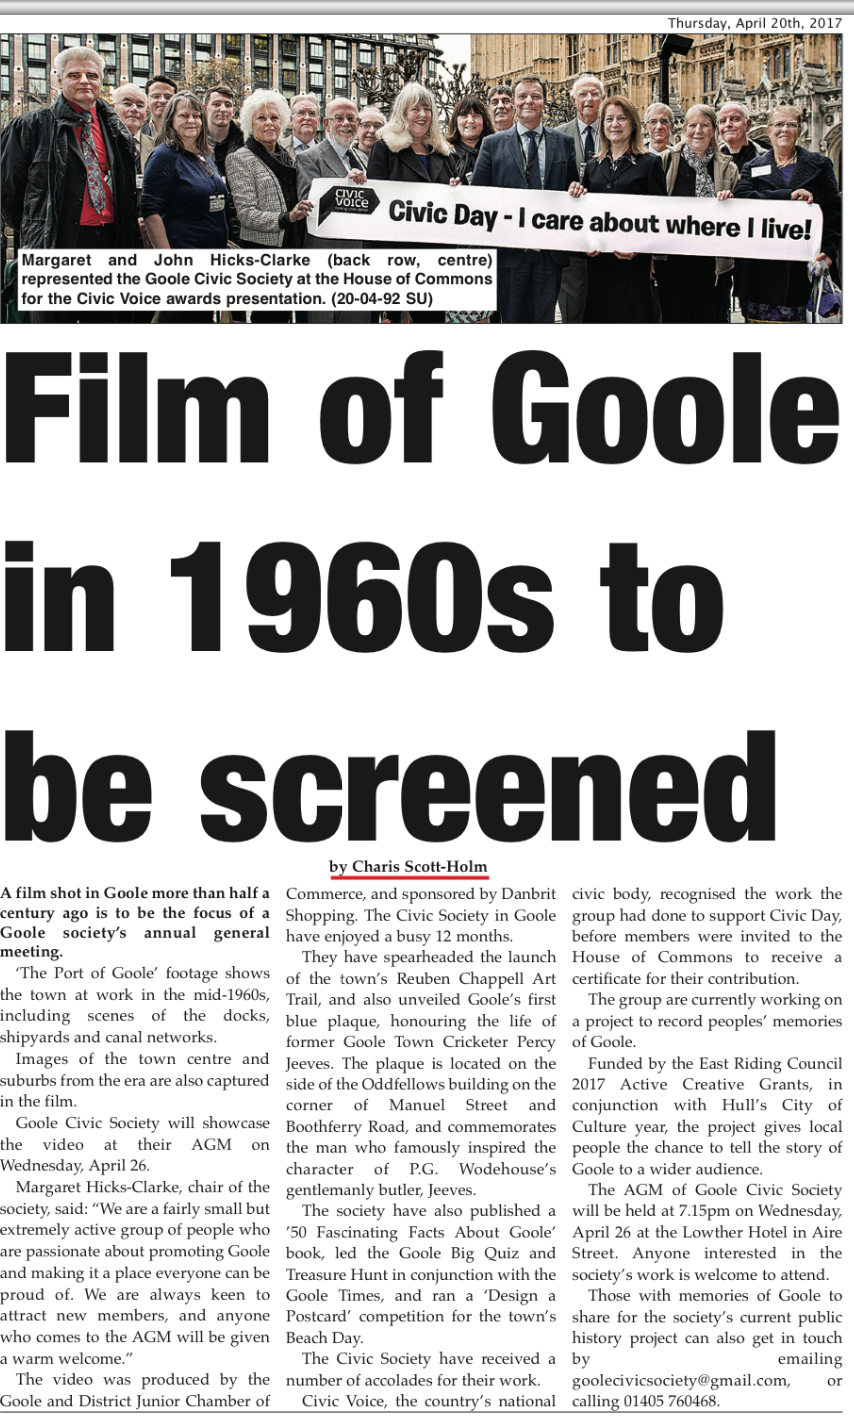 Goole Times coverage of screening of historic film as Civic Society annual general meeting